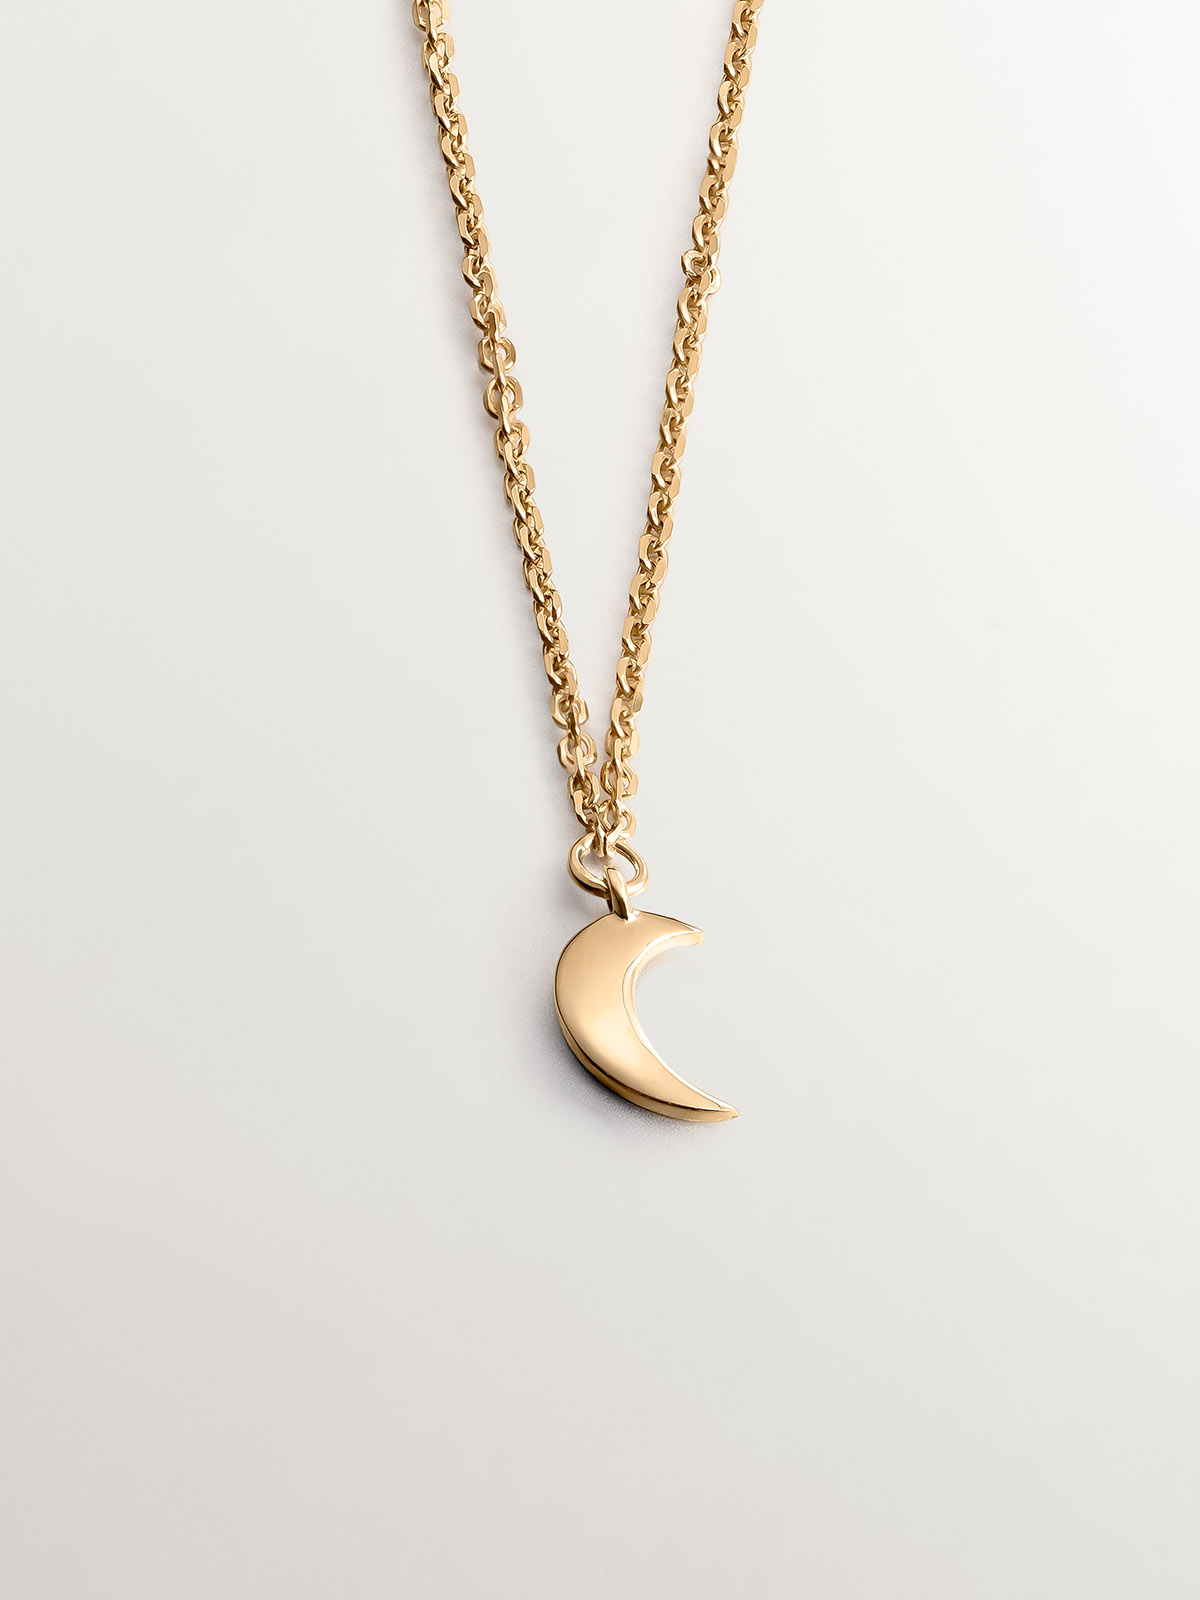 9K Yellow Gold Pendant with Moon